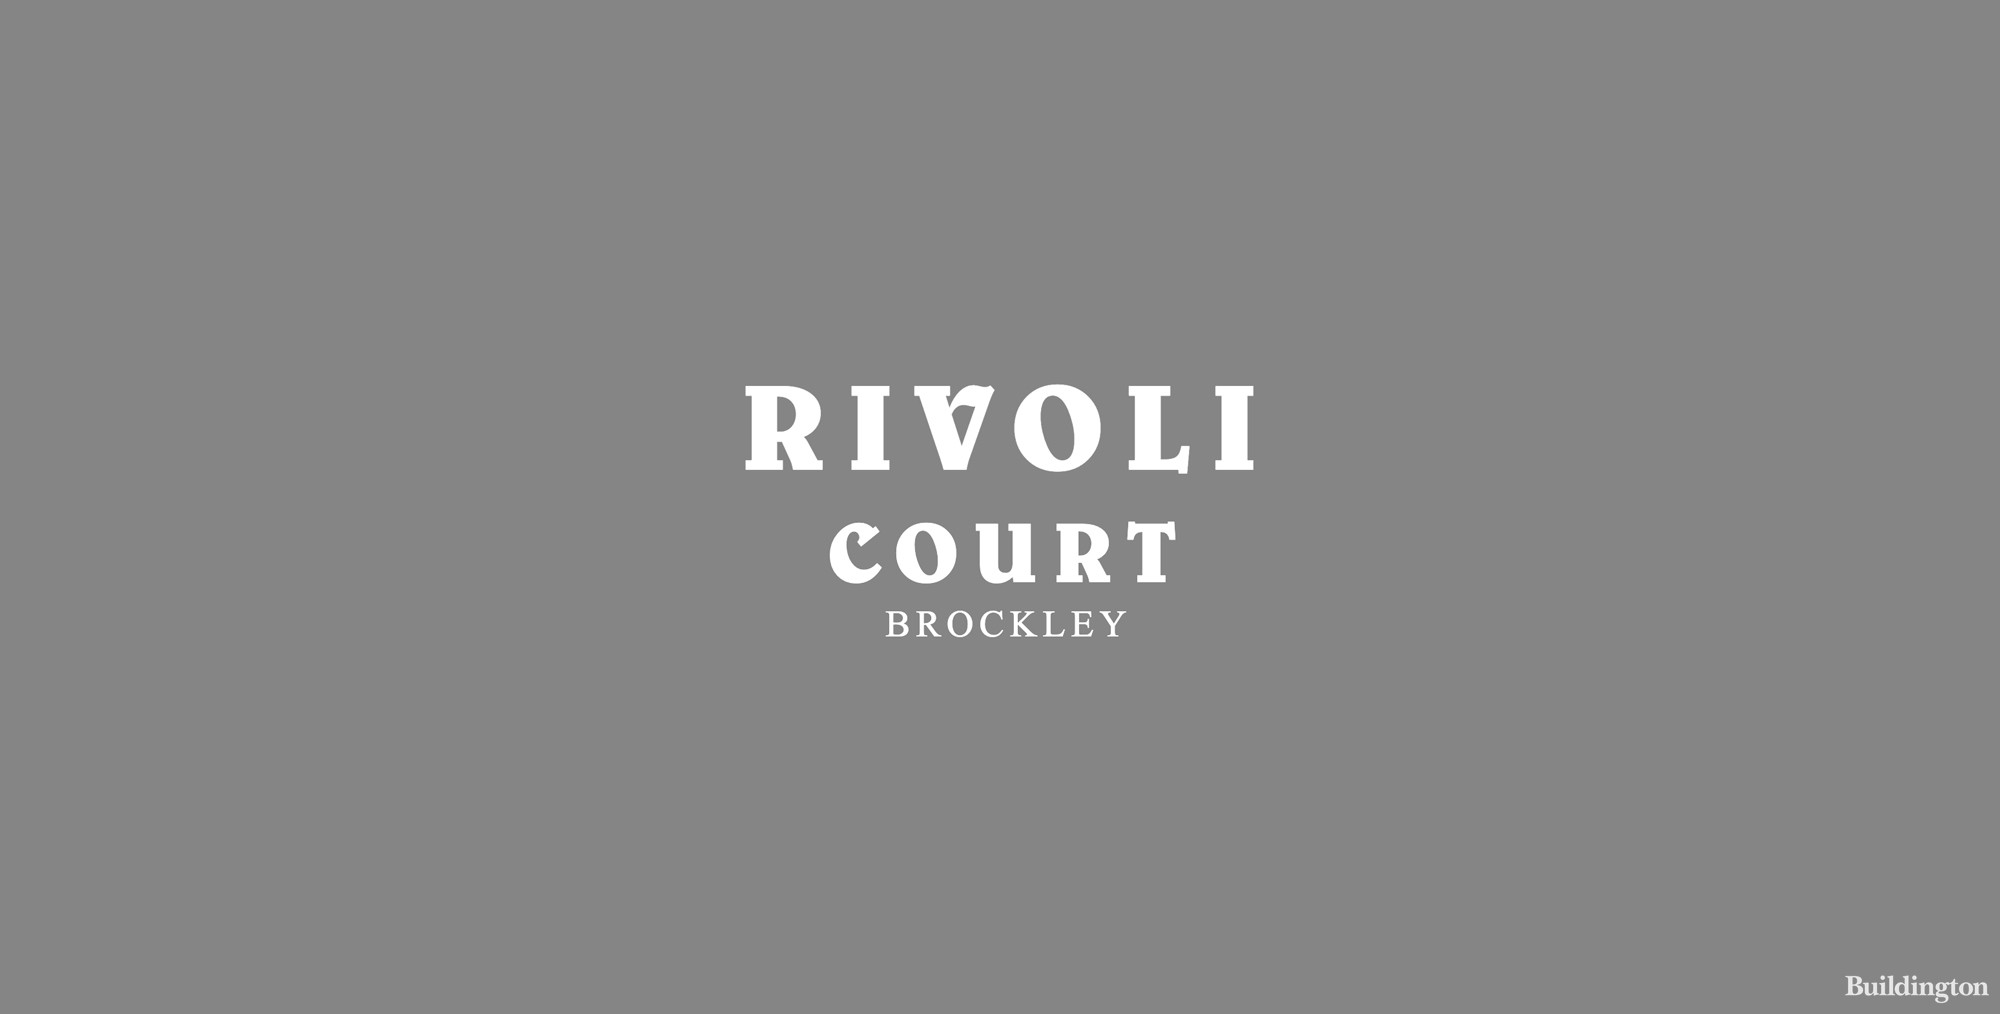 Cover image for Rivoly Court development by Just Simple Homes in Brockley, London SE4